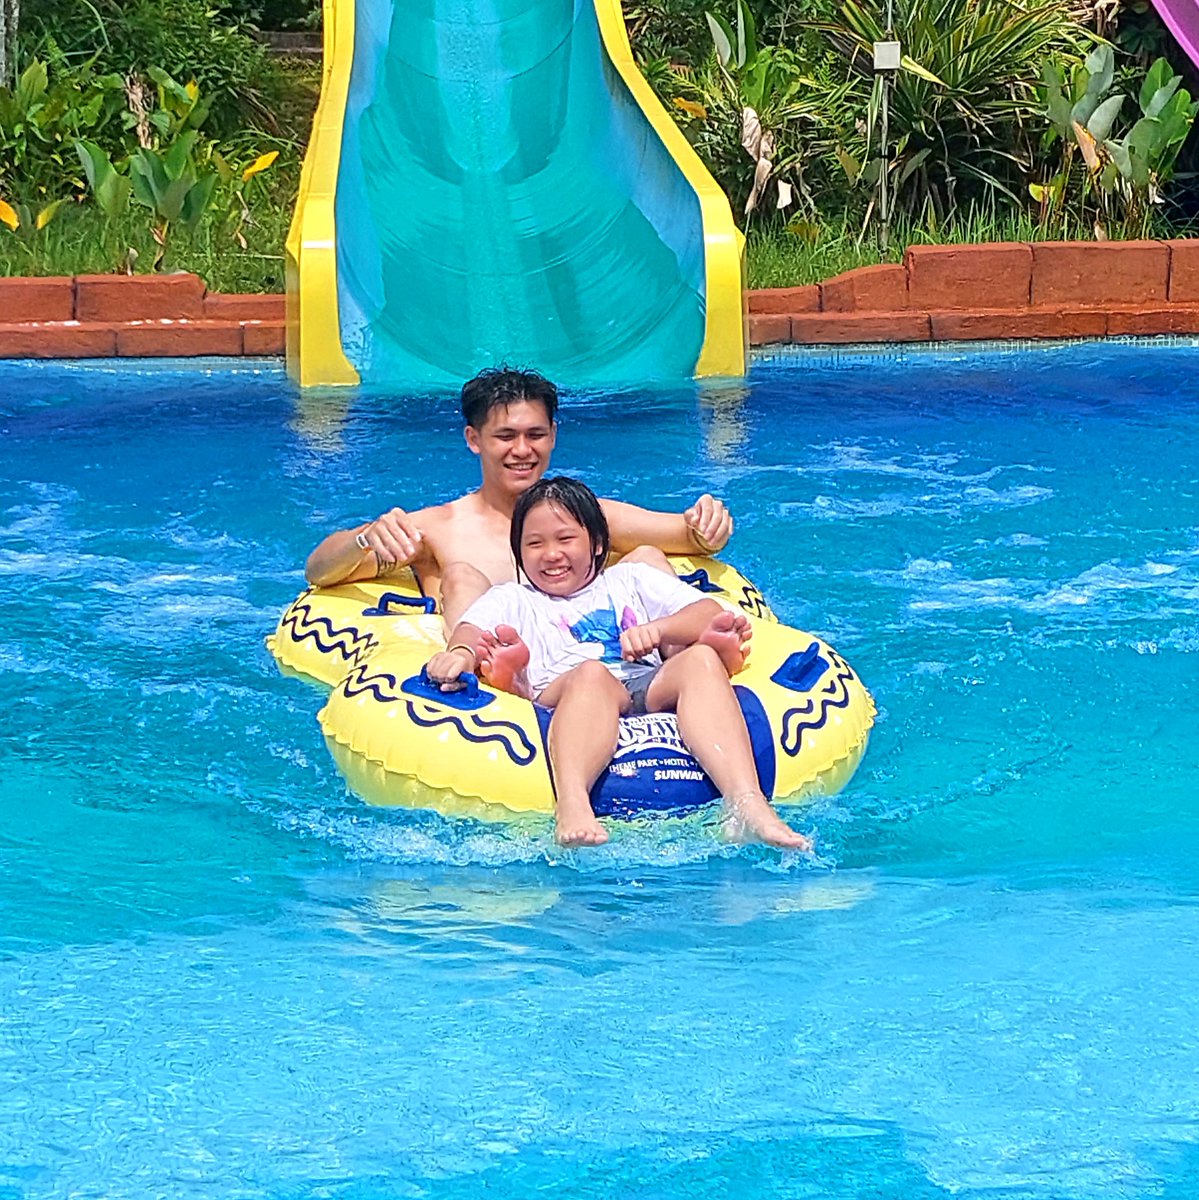 Make a SPLASH on the Tube Raider this weekend! 💦

What are you waiting for?

#SunwayLostWorldOfTambun
#AwesomeMoments
#STPStudios
#PlayWithConfidence
#StayWithConfidence